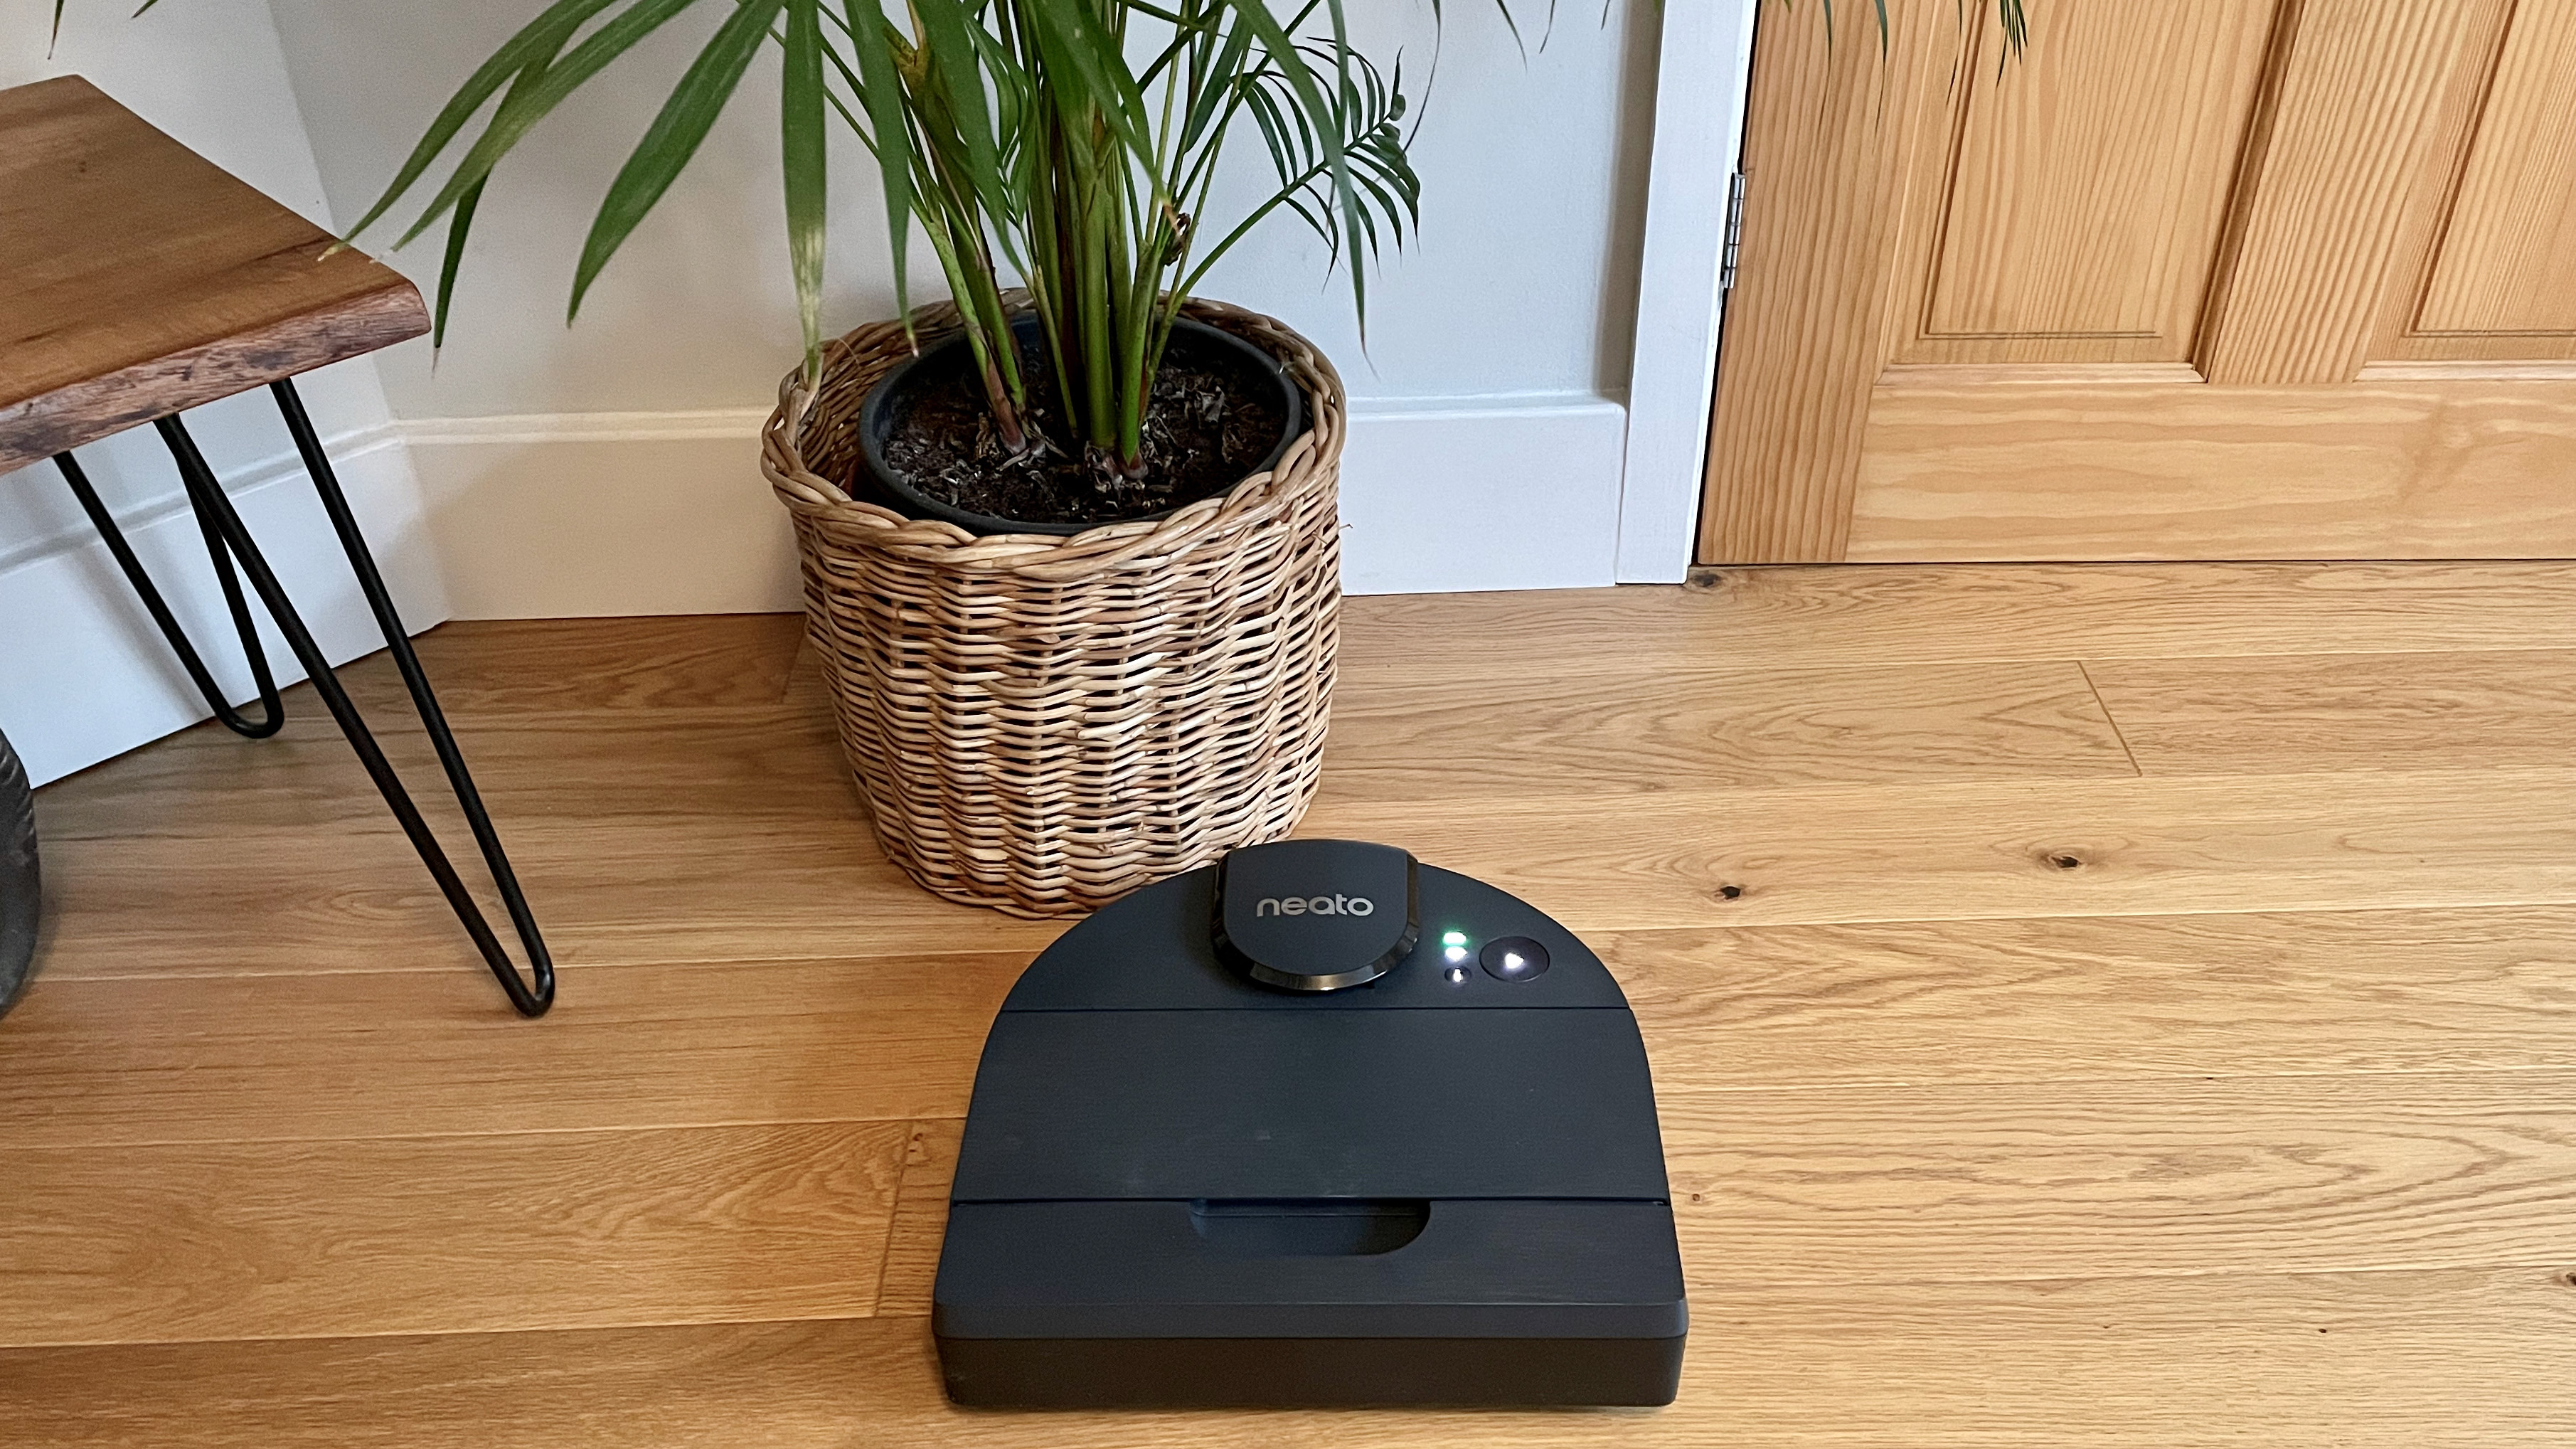 The Neato D8 next to a wicker plant pot cleaning a hard wood floor